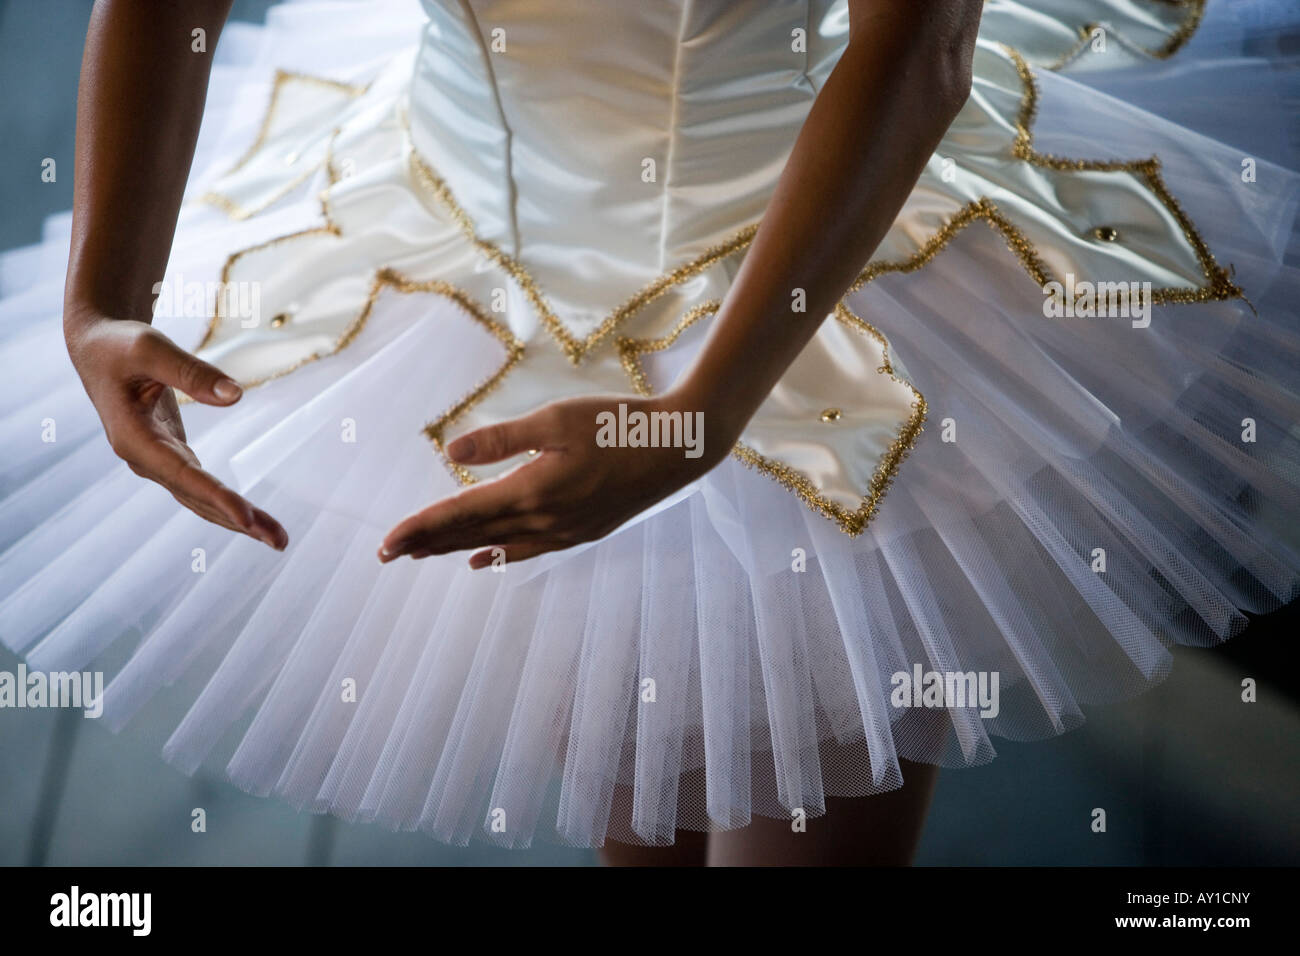 Midsection of a young woman practicing ballet dancing Stock Photo